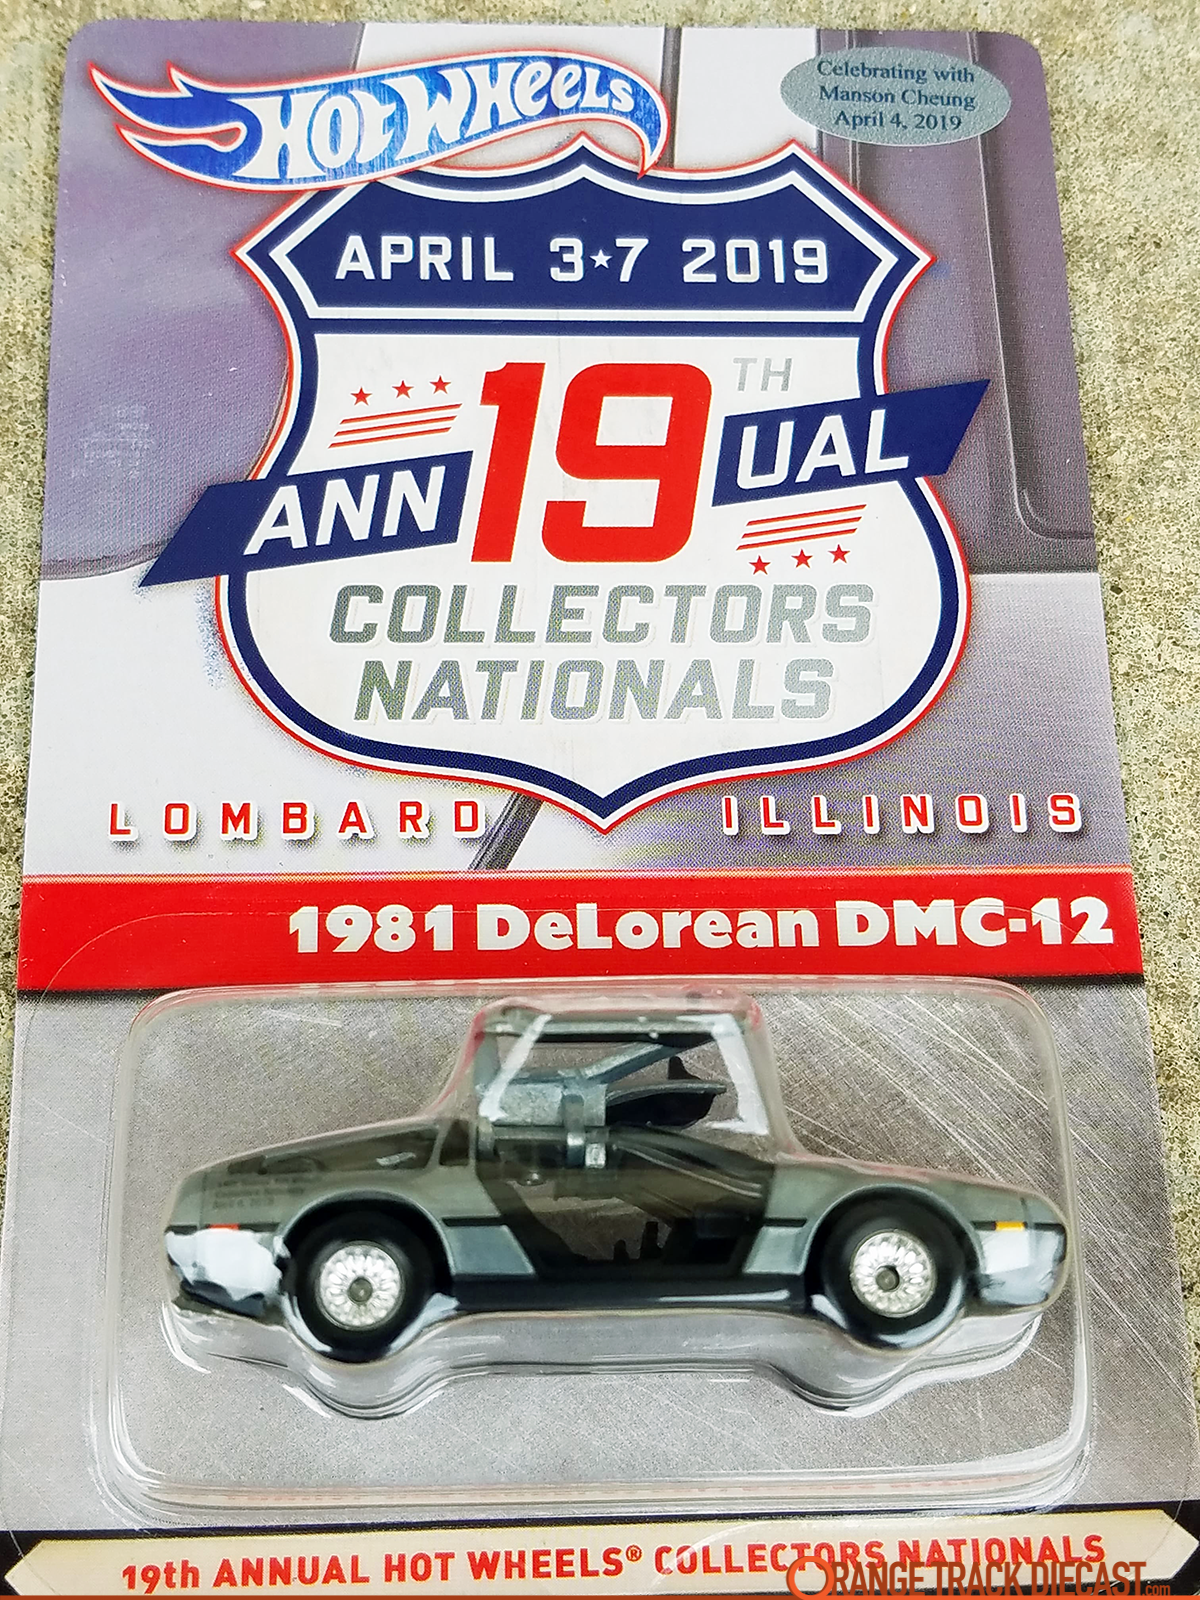 2019 hot wheels convention